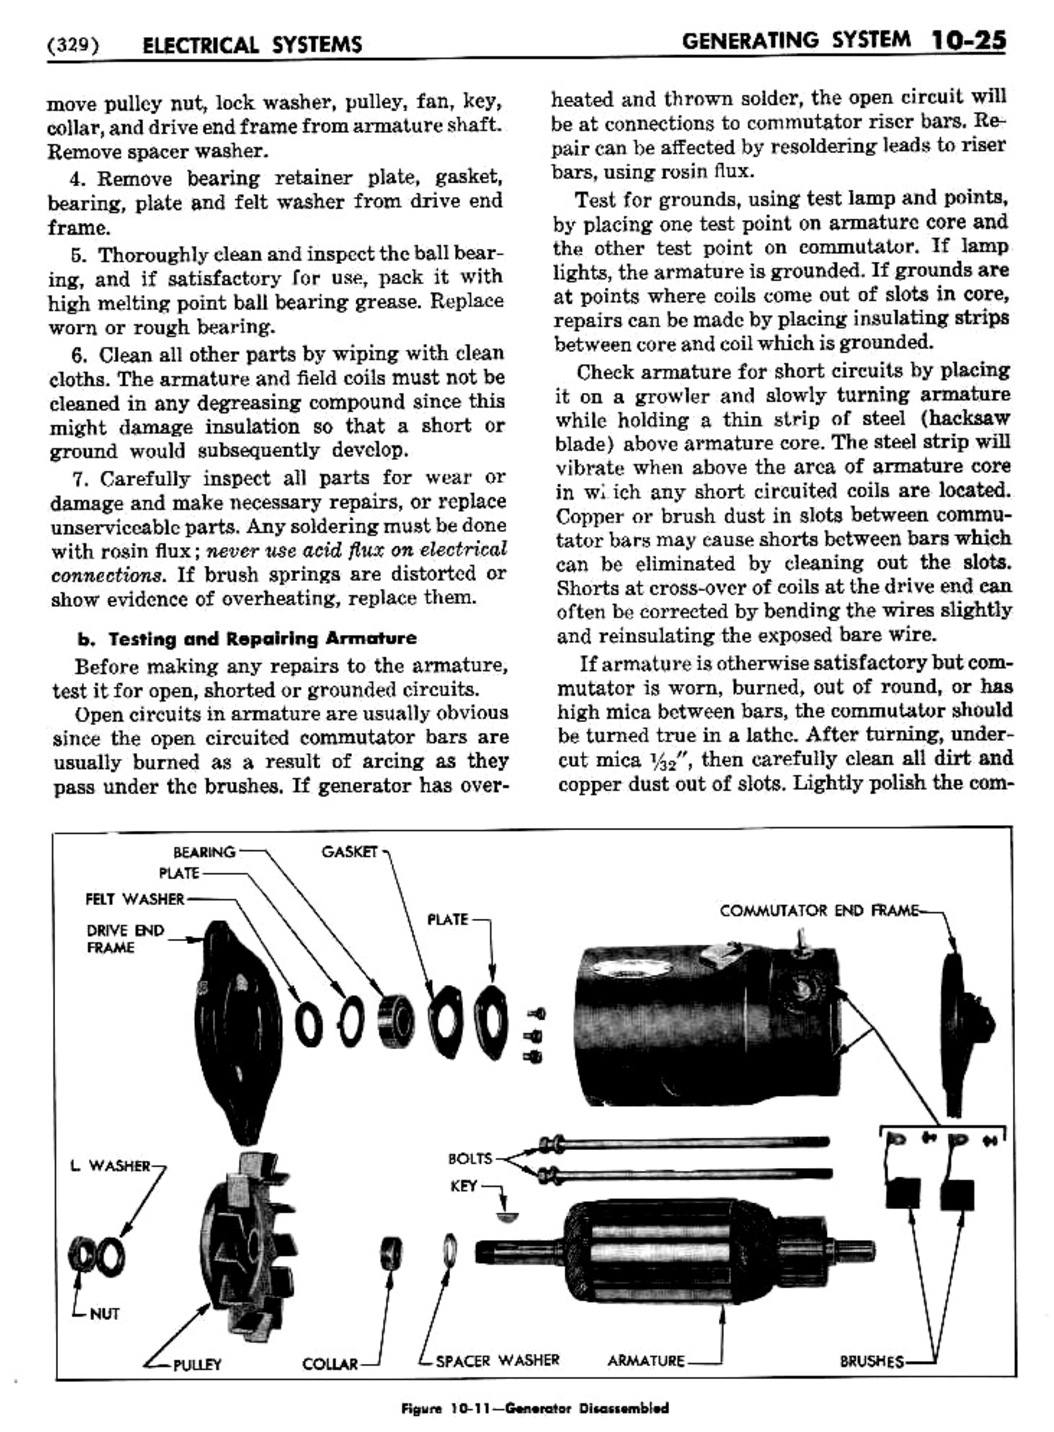 n_11 1955 Buick Shop Manual - Electrical Systems-025-025.jpg